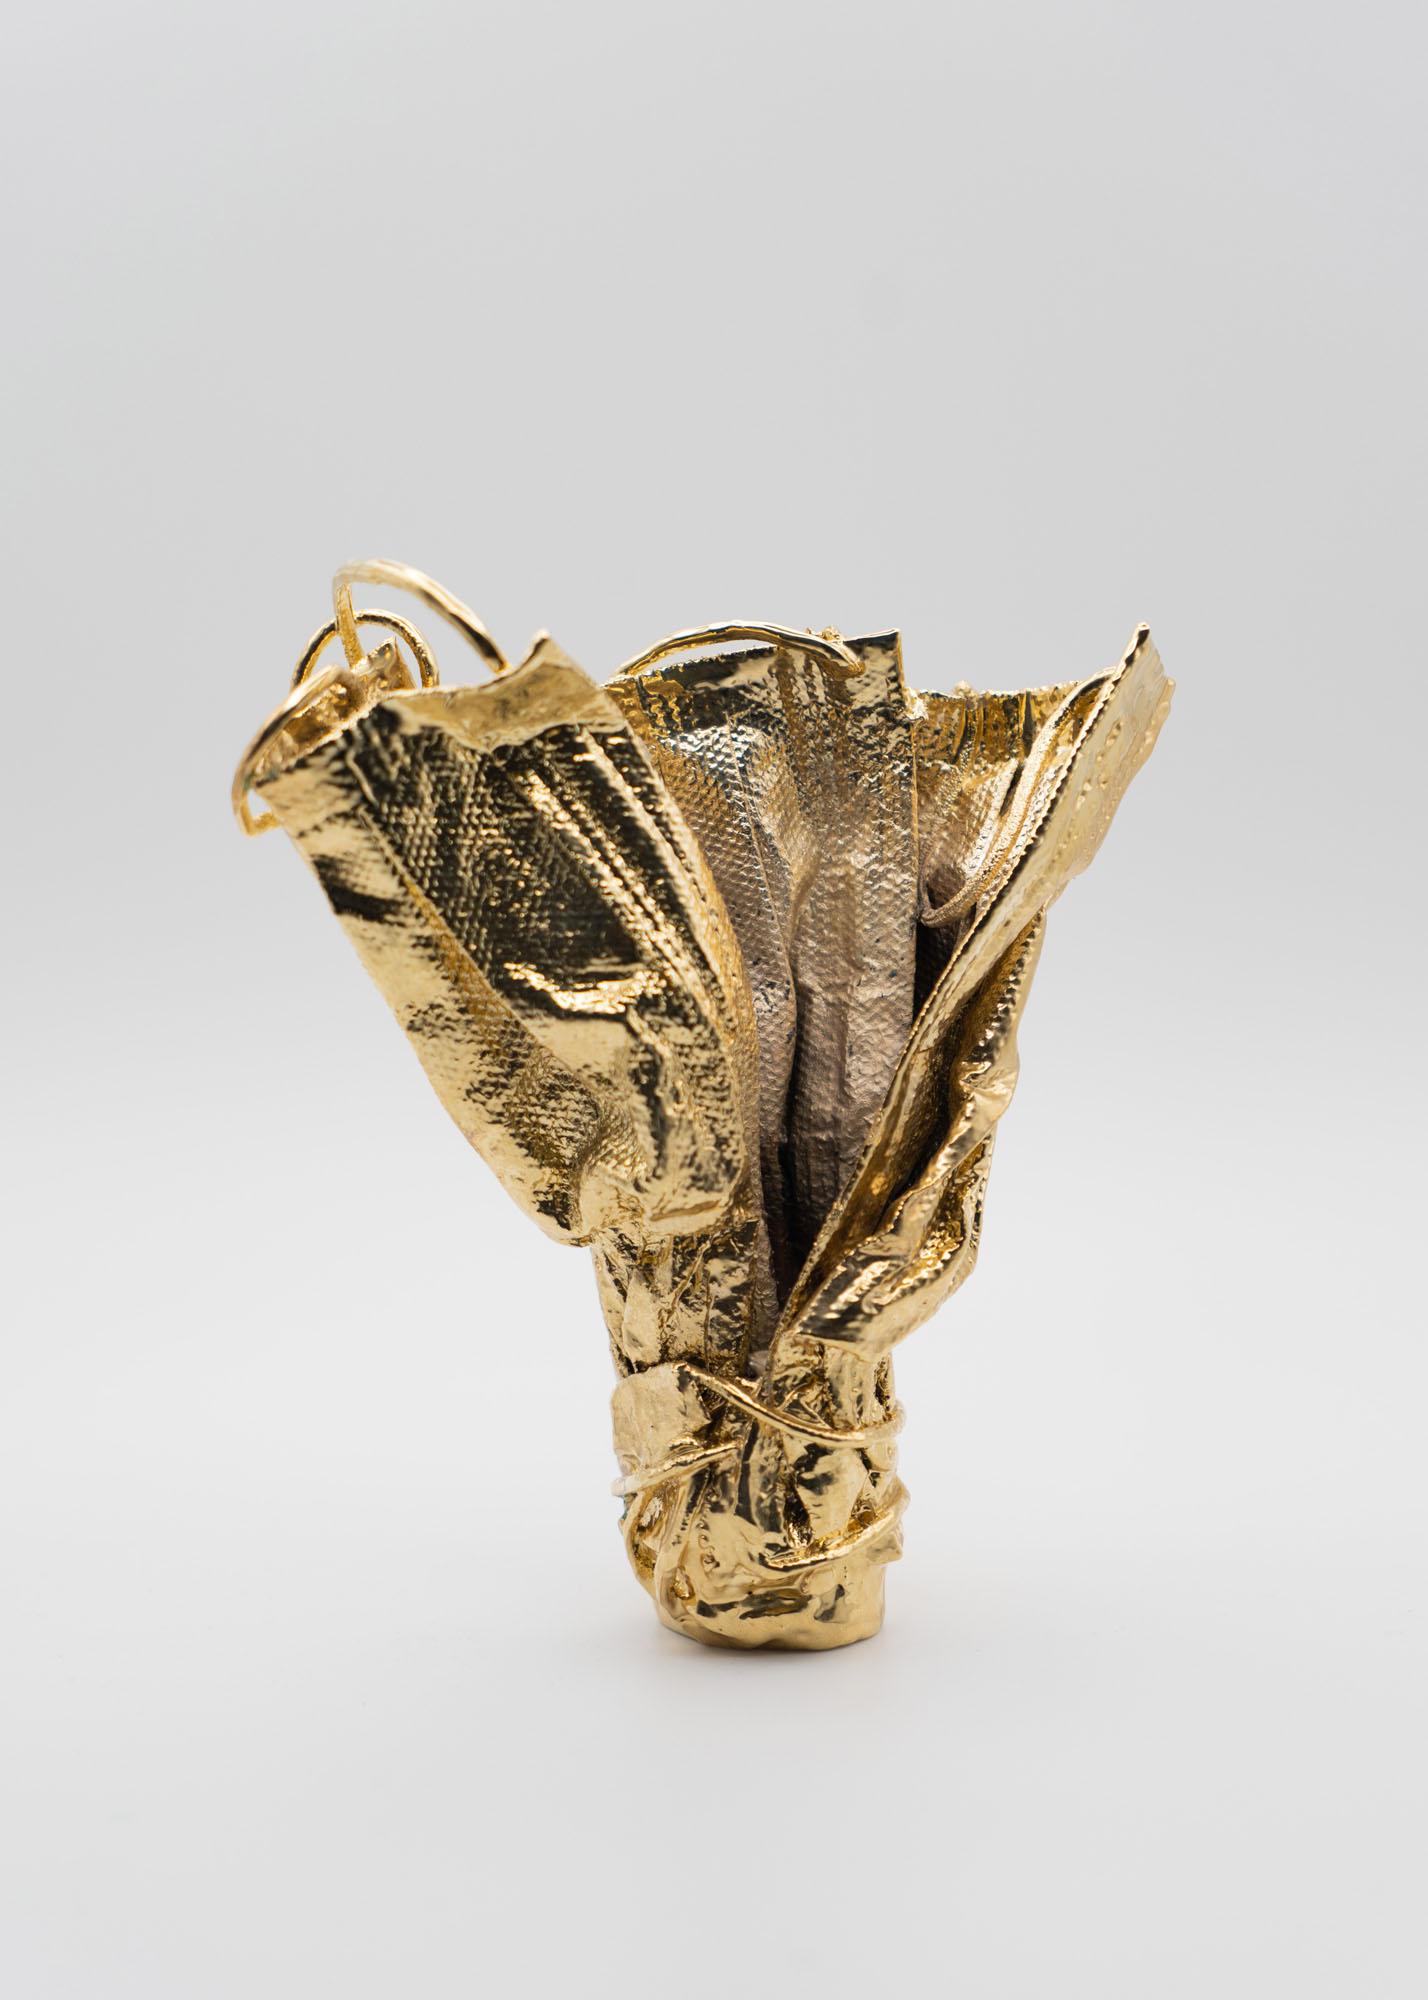 Contemporary Remask Act 011 Gold Art Object Made from Surgical Mask by Enrico Girotti For Sale